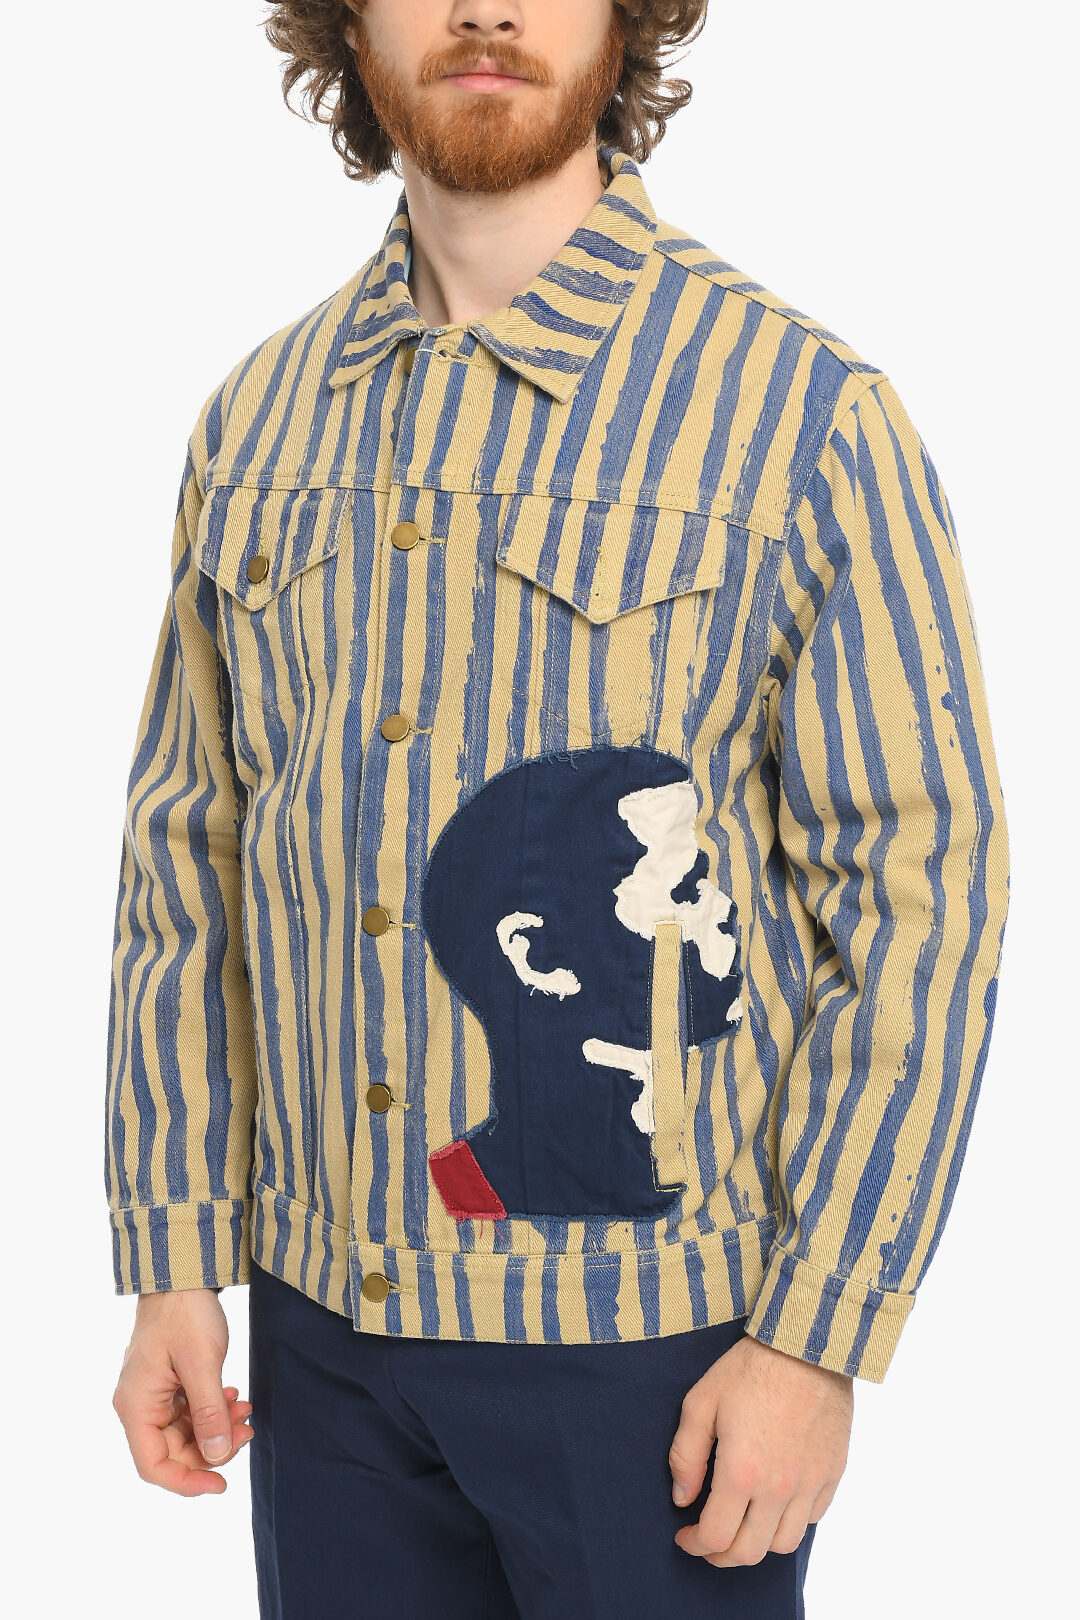 KidSuper Awning Striped Overshirt with Golden Buttons men - Glamood Outlet